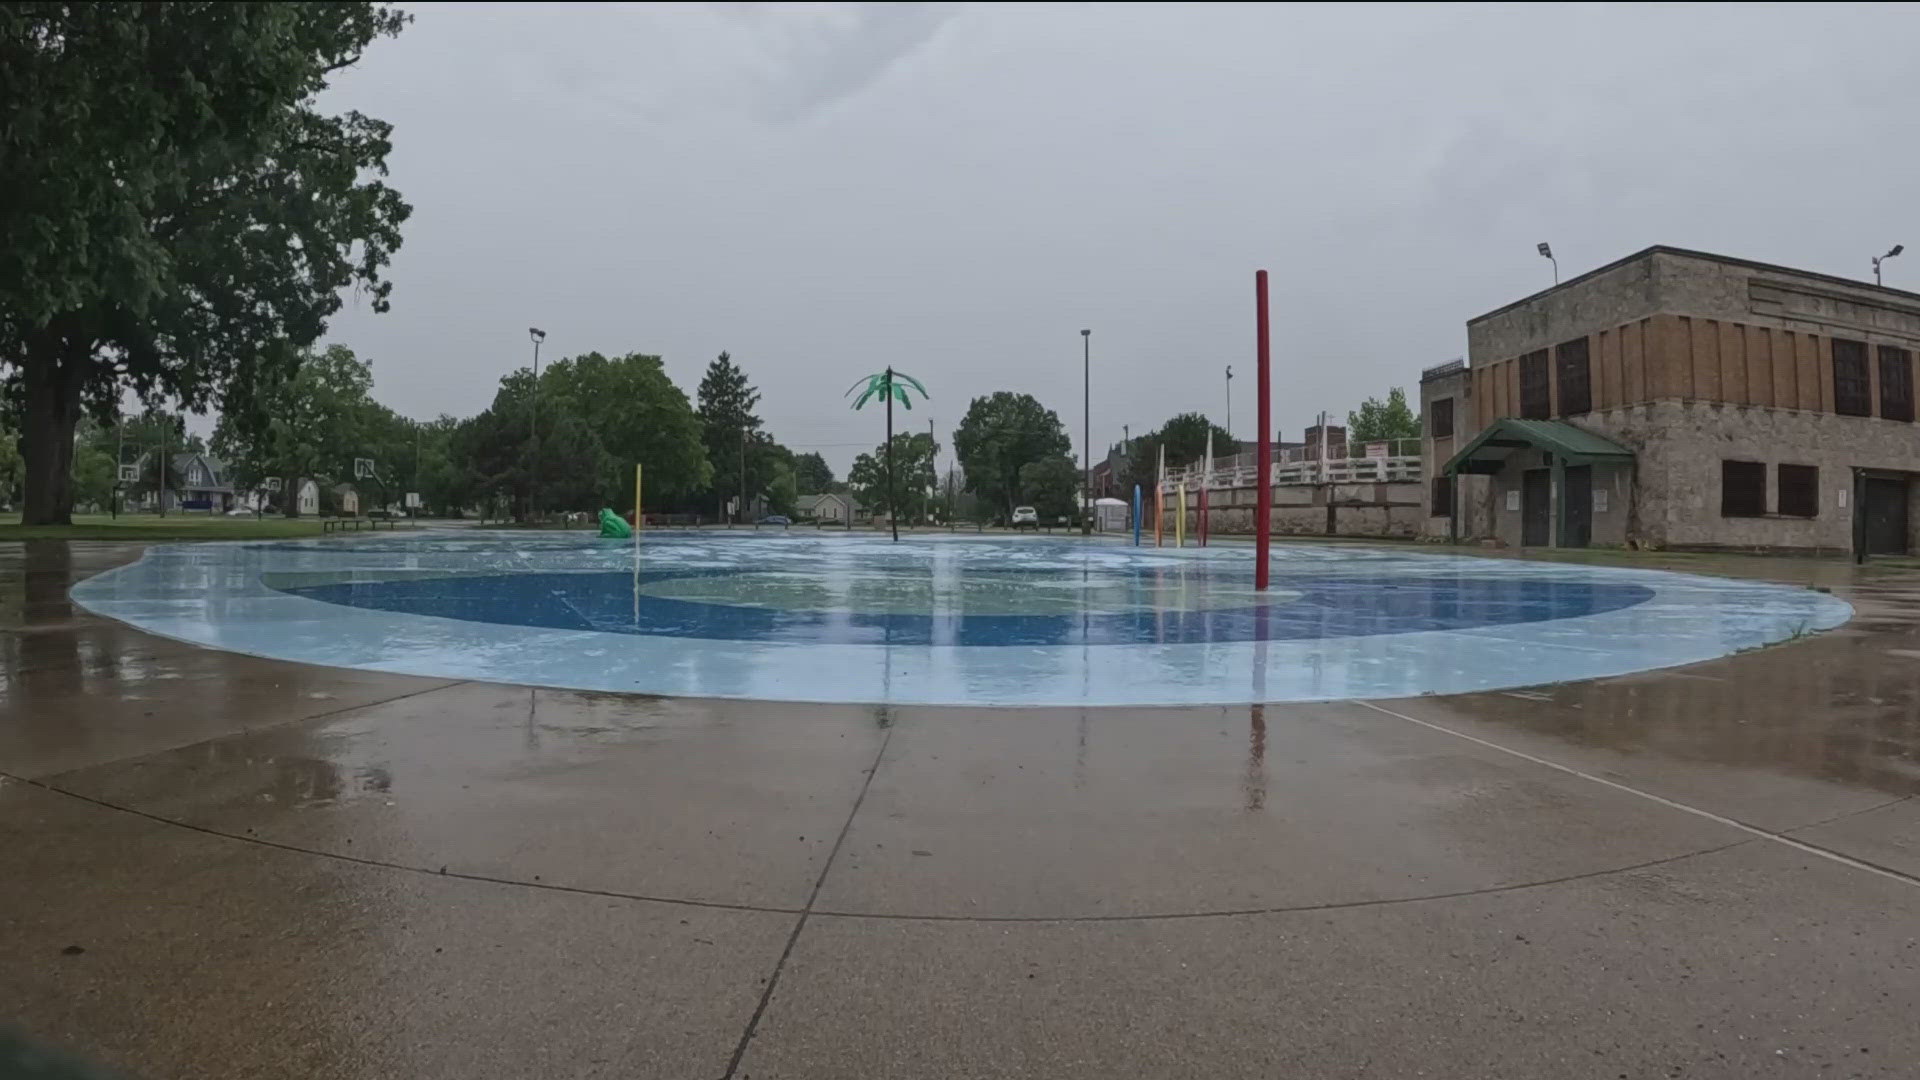 On Tuesday, the only water at the Savage Park splash pad was from the rain, leaving community leaders and a city council person questioning why that hasn't changed.